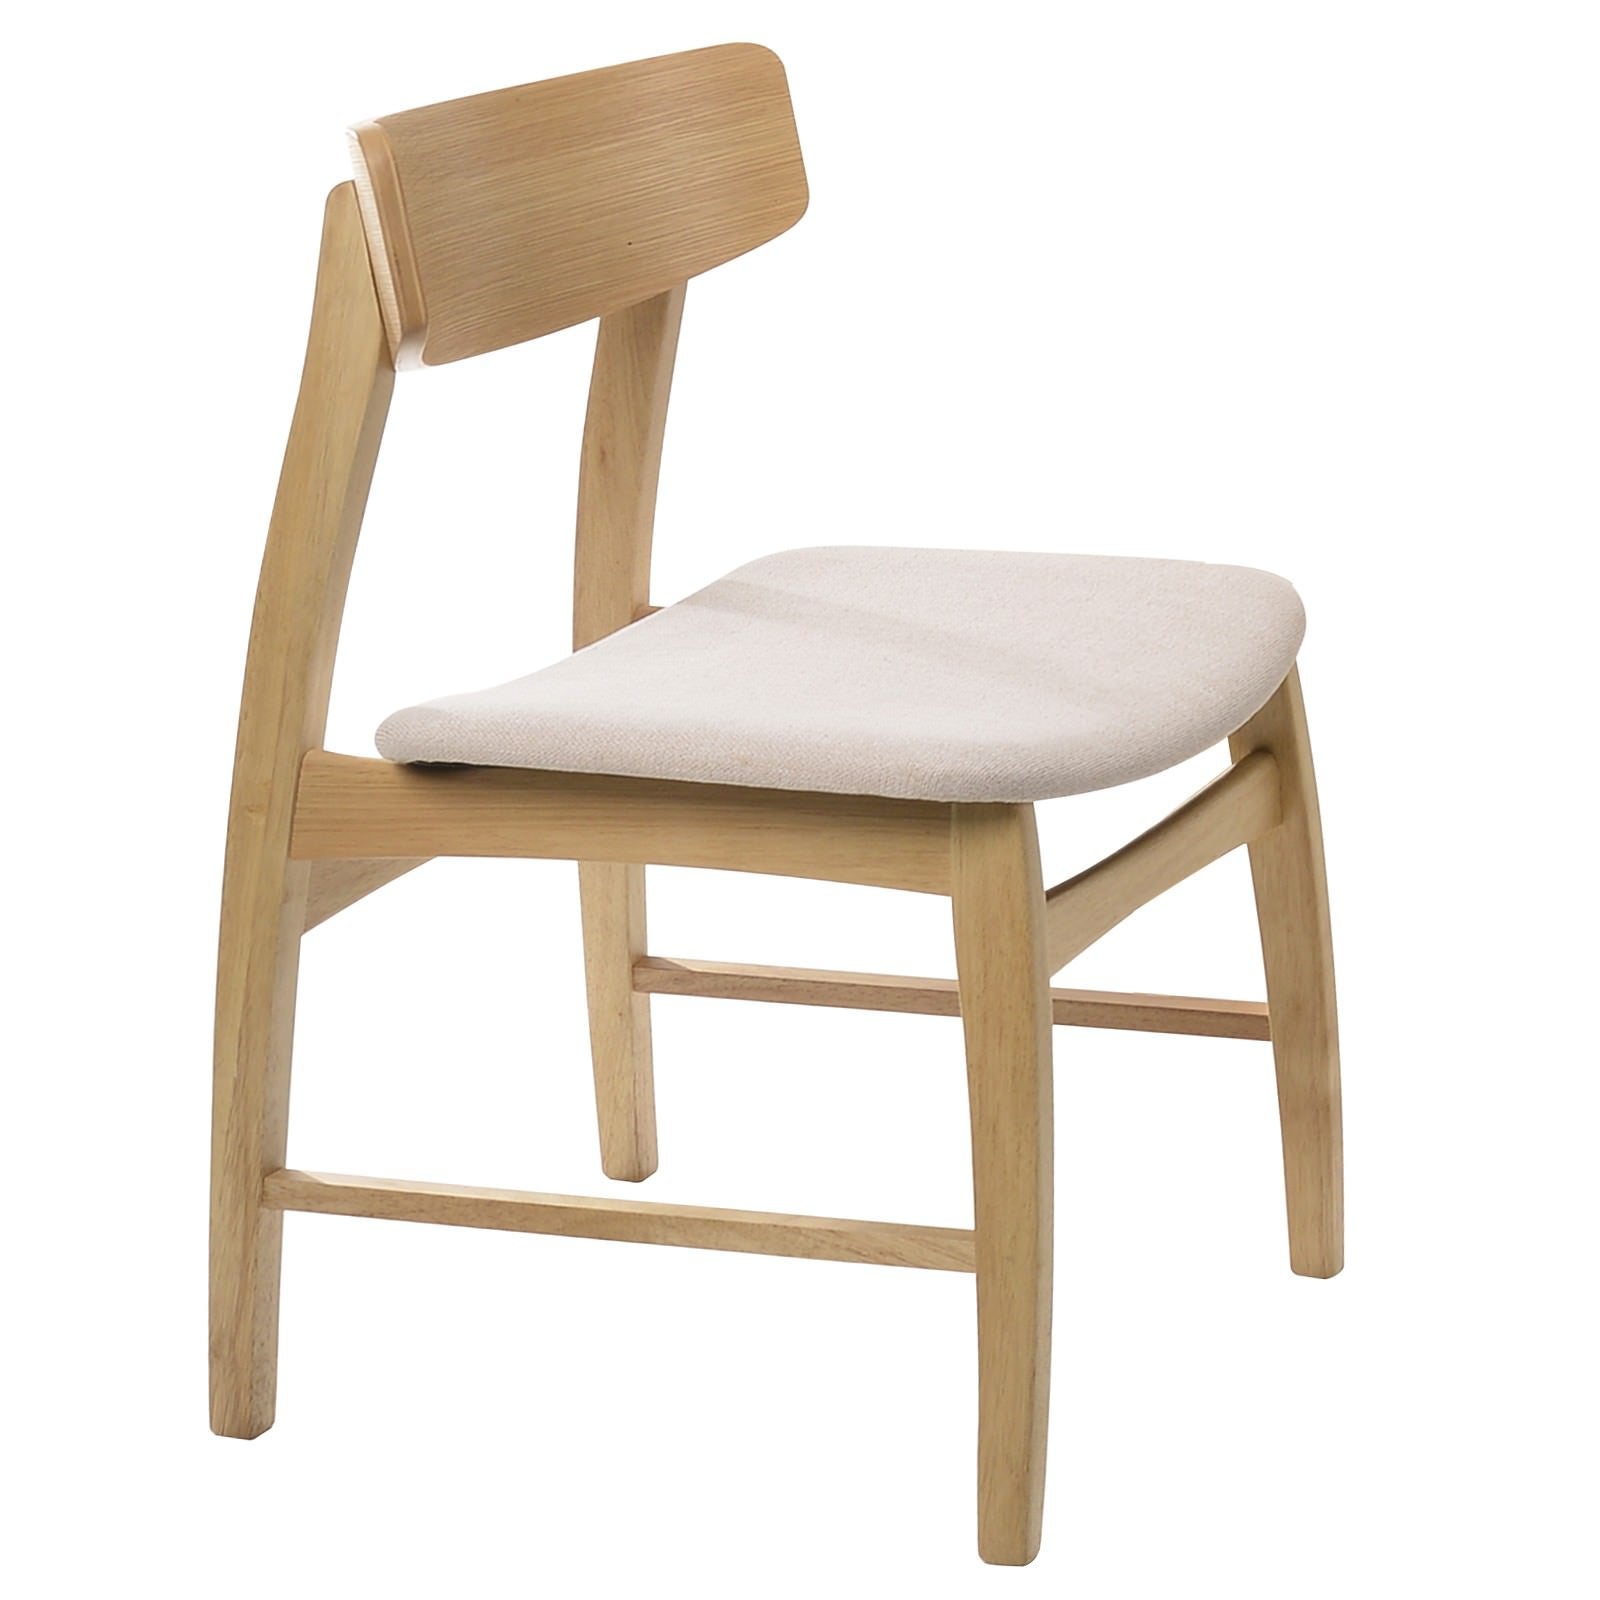 Harrogate Rubberwood Timber Dining Chair with fabric Seat